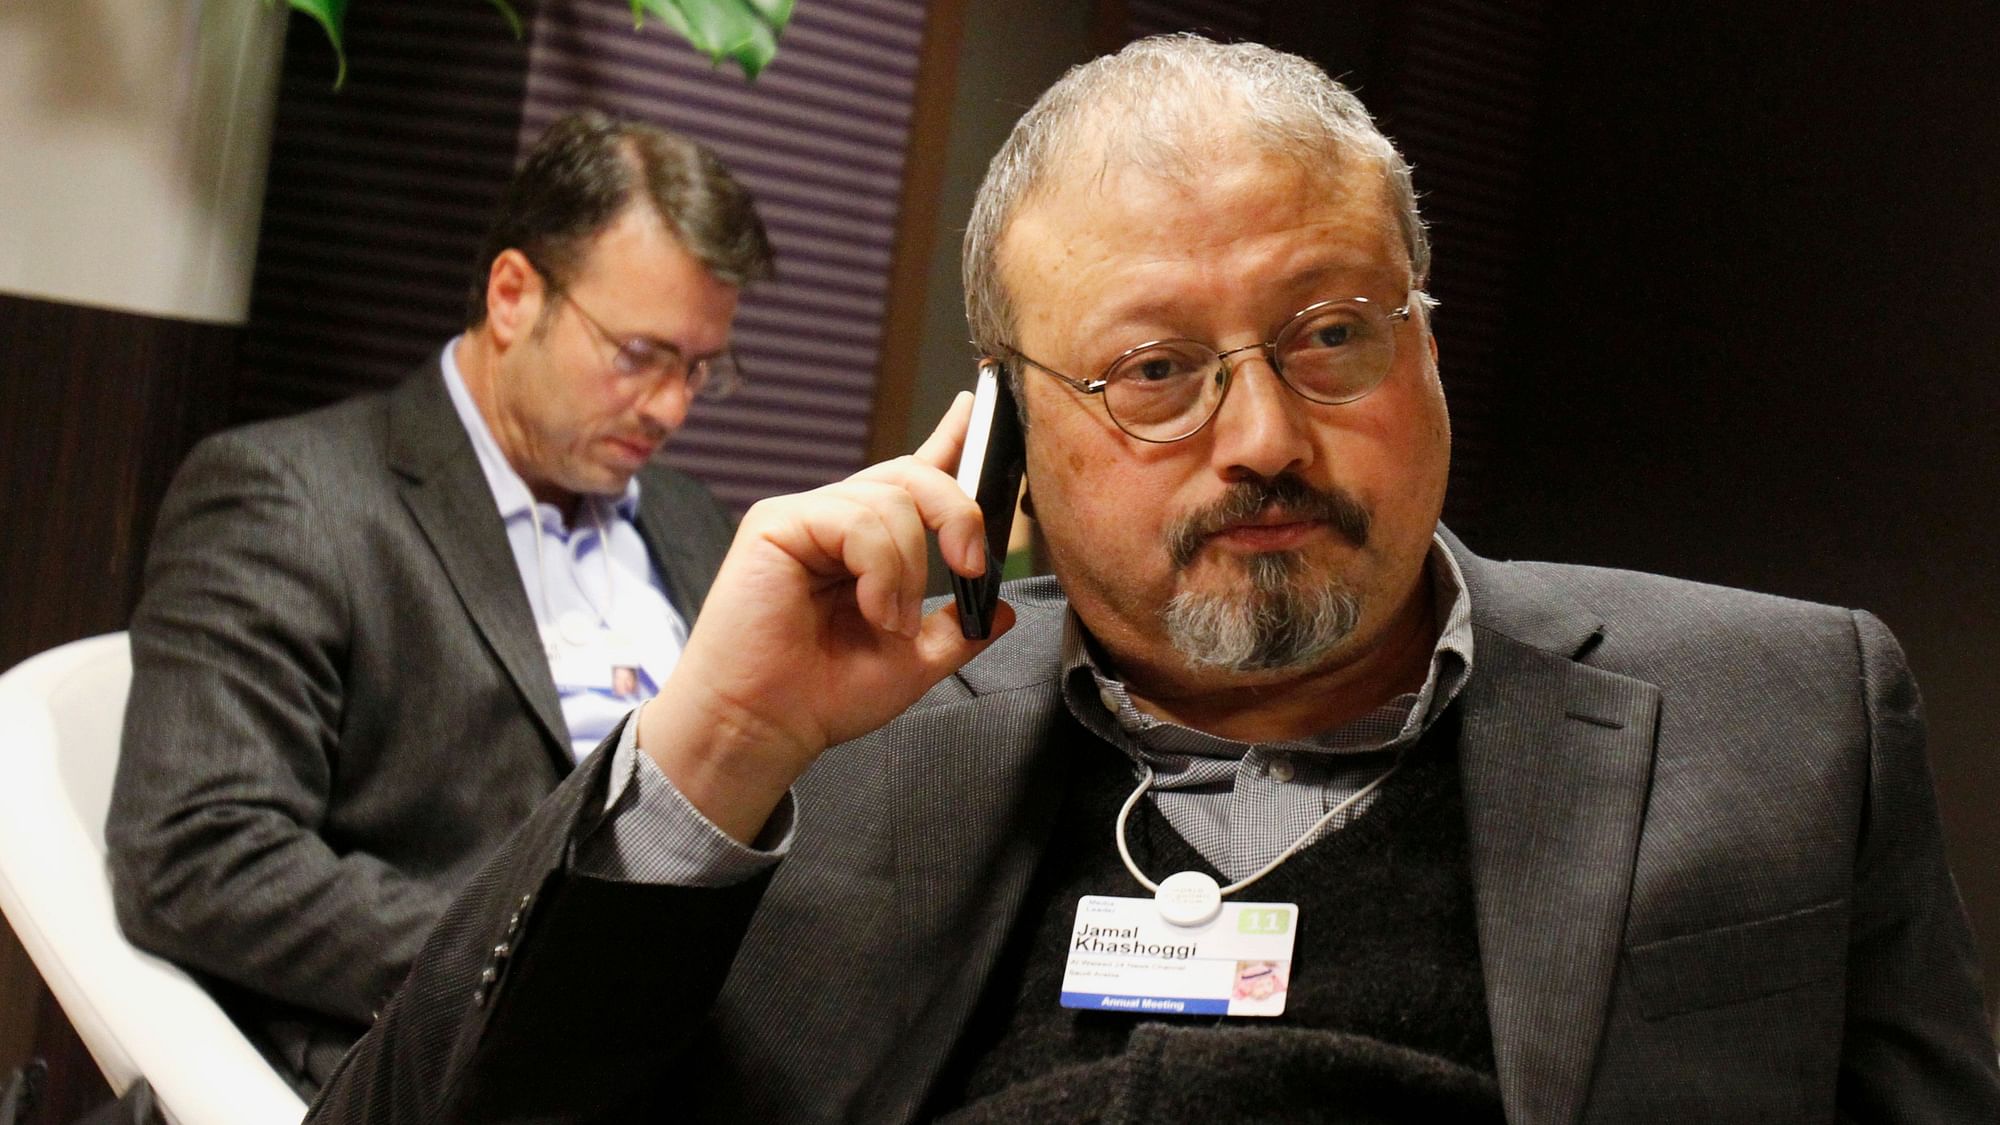 File image of Jamal Khashoggi. A Turkish newspaper has published transcripts of the recordings from the Saudi consulate, where he is said to be killed in October last year.